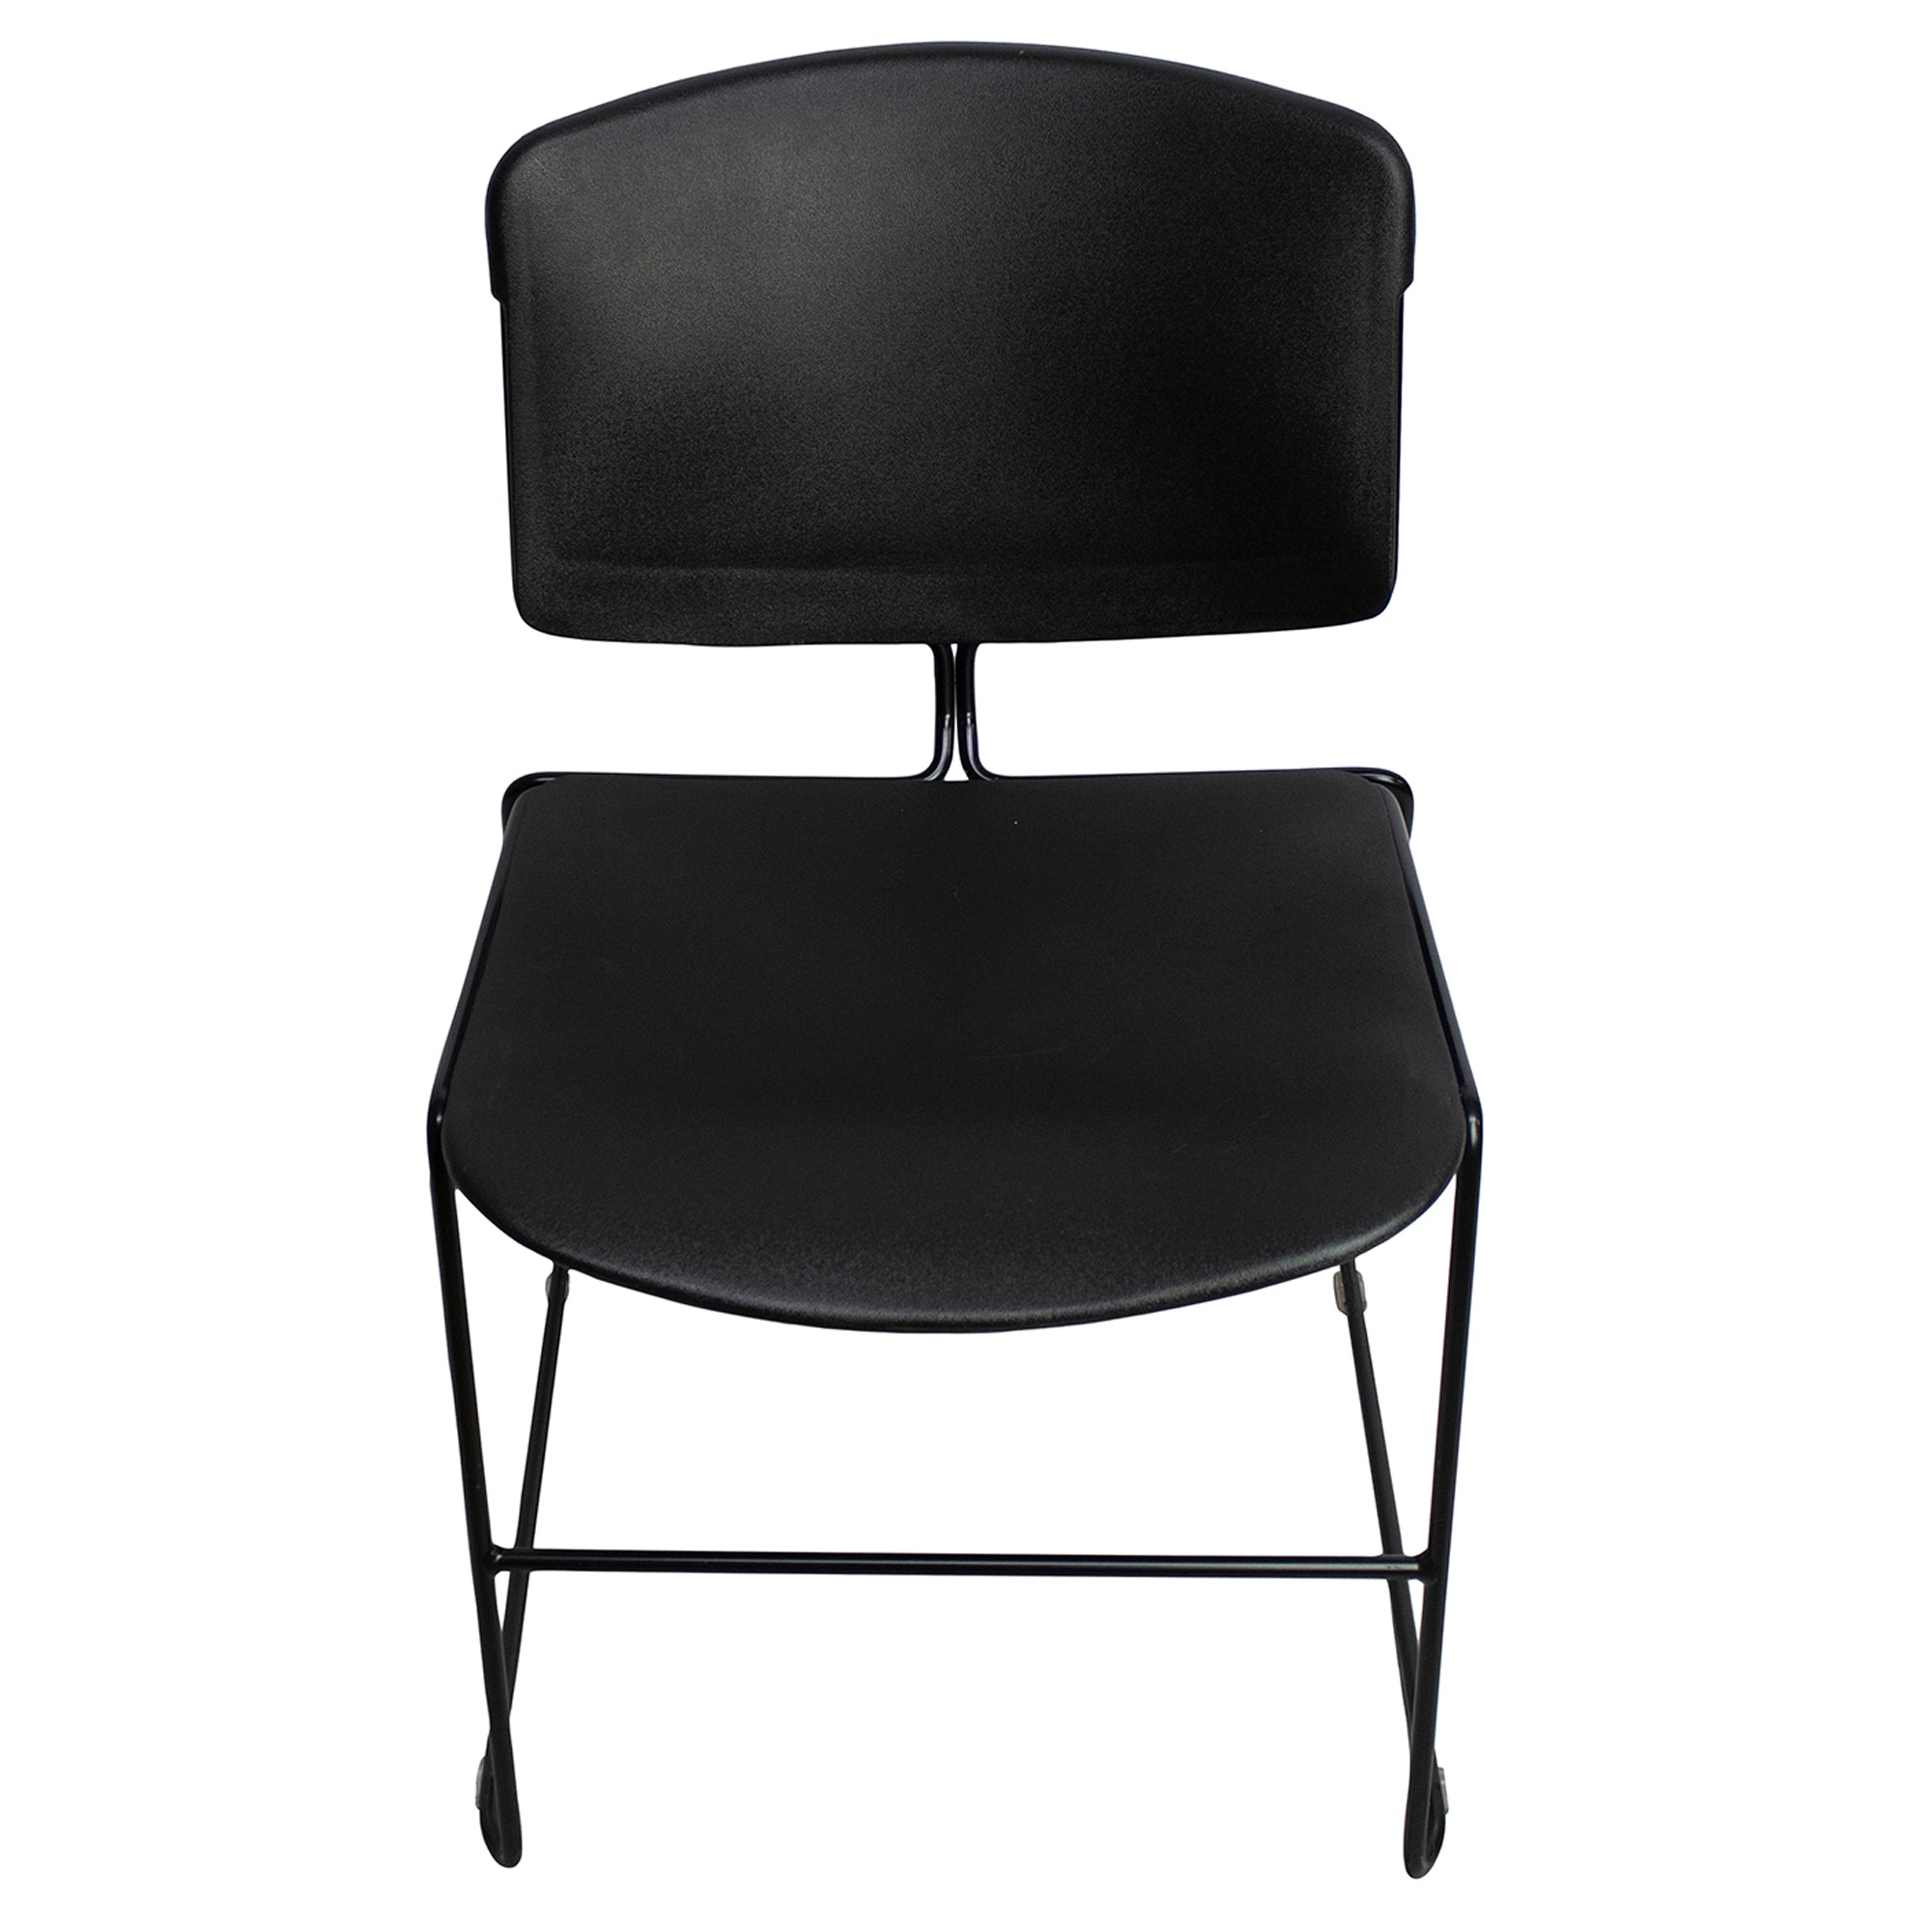 Steelcase Max III Stackable Chair - Black - Preowned